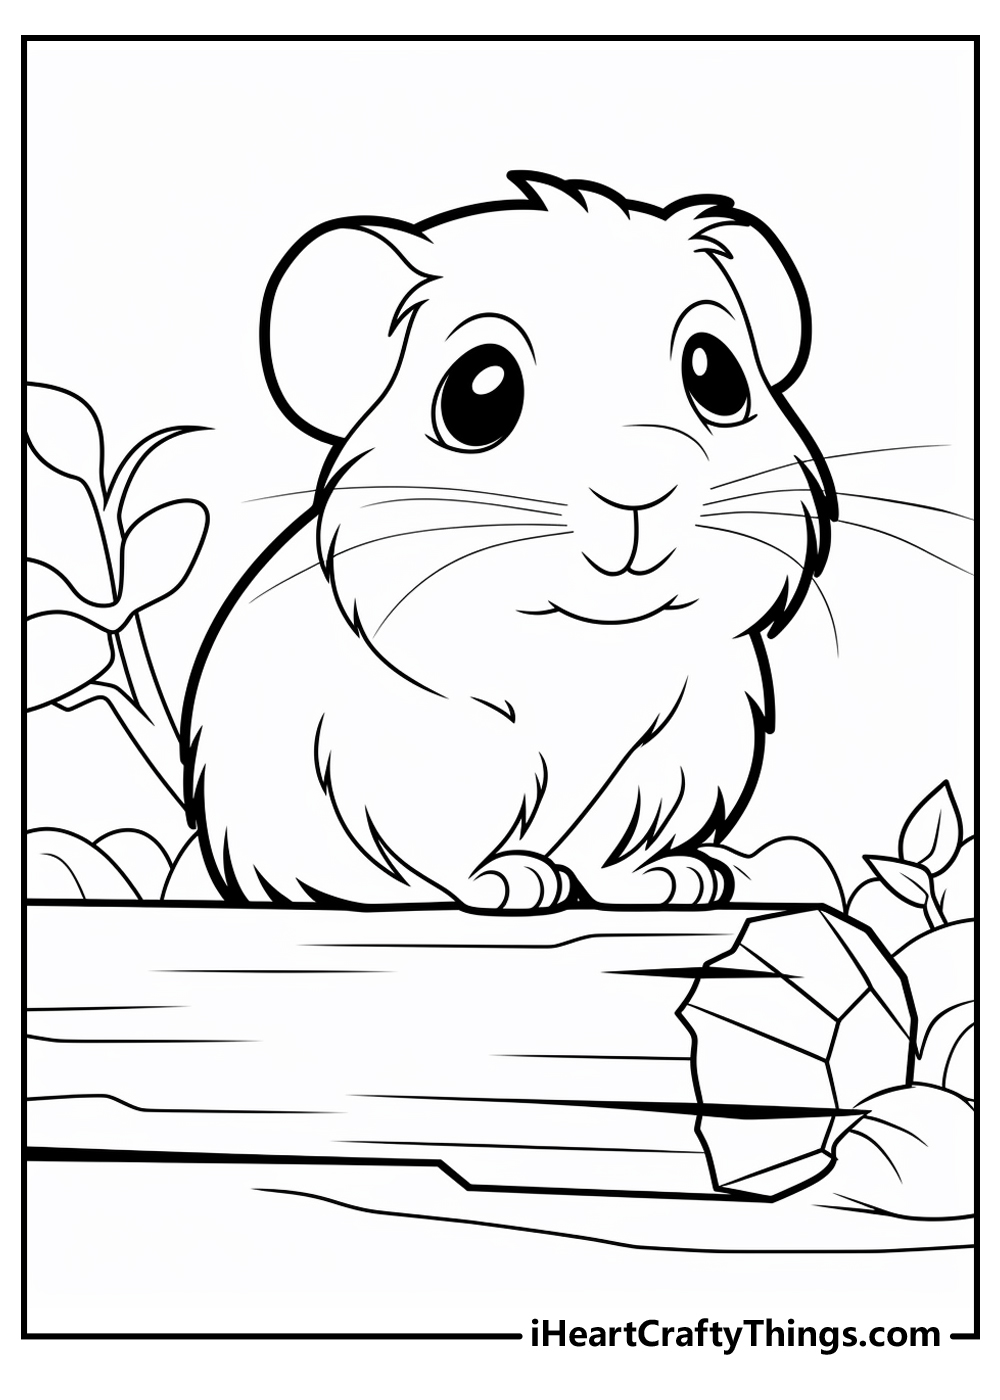 Guinea pig coloring pages free printables